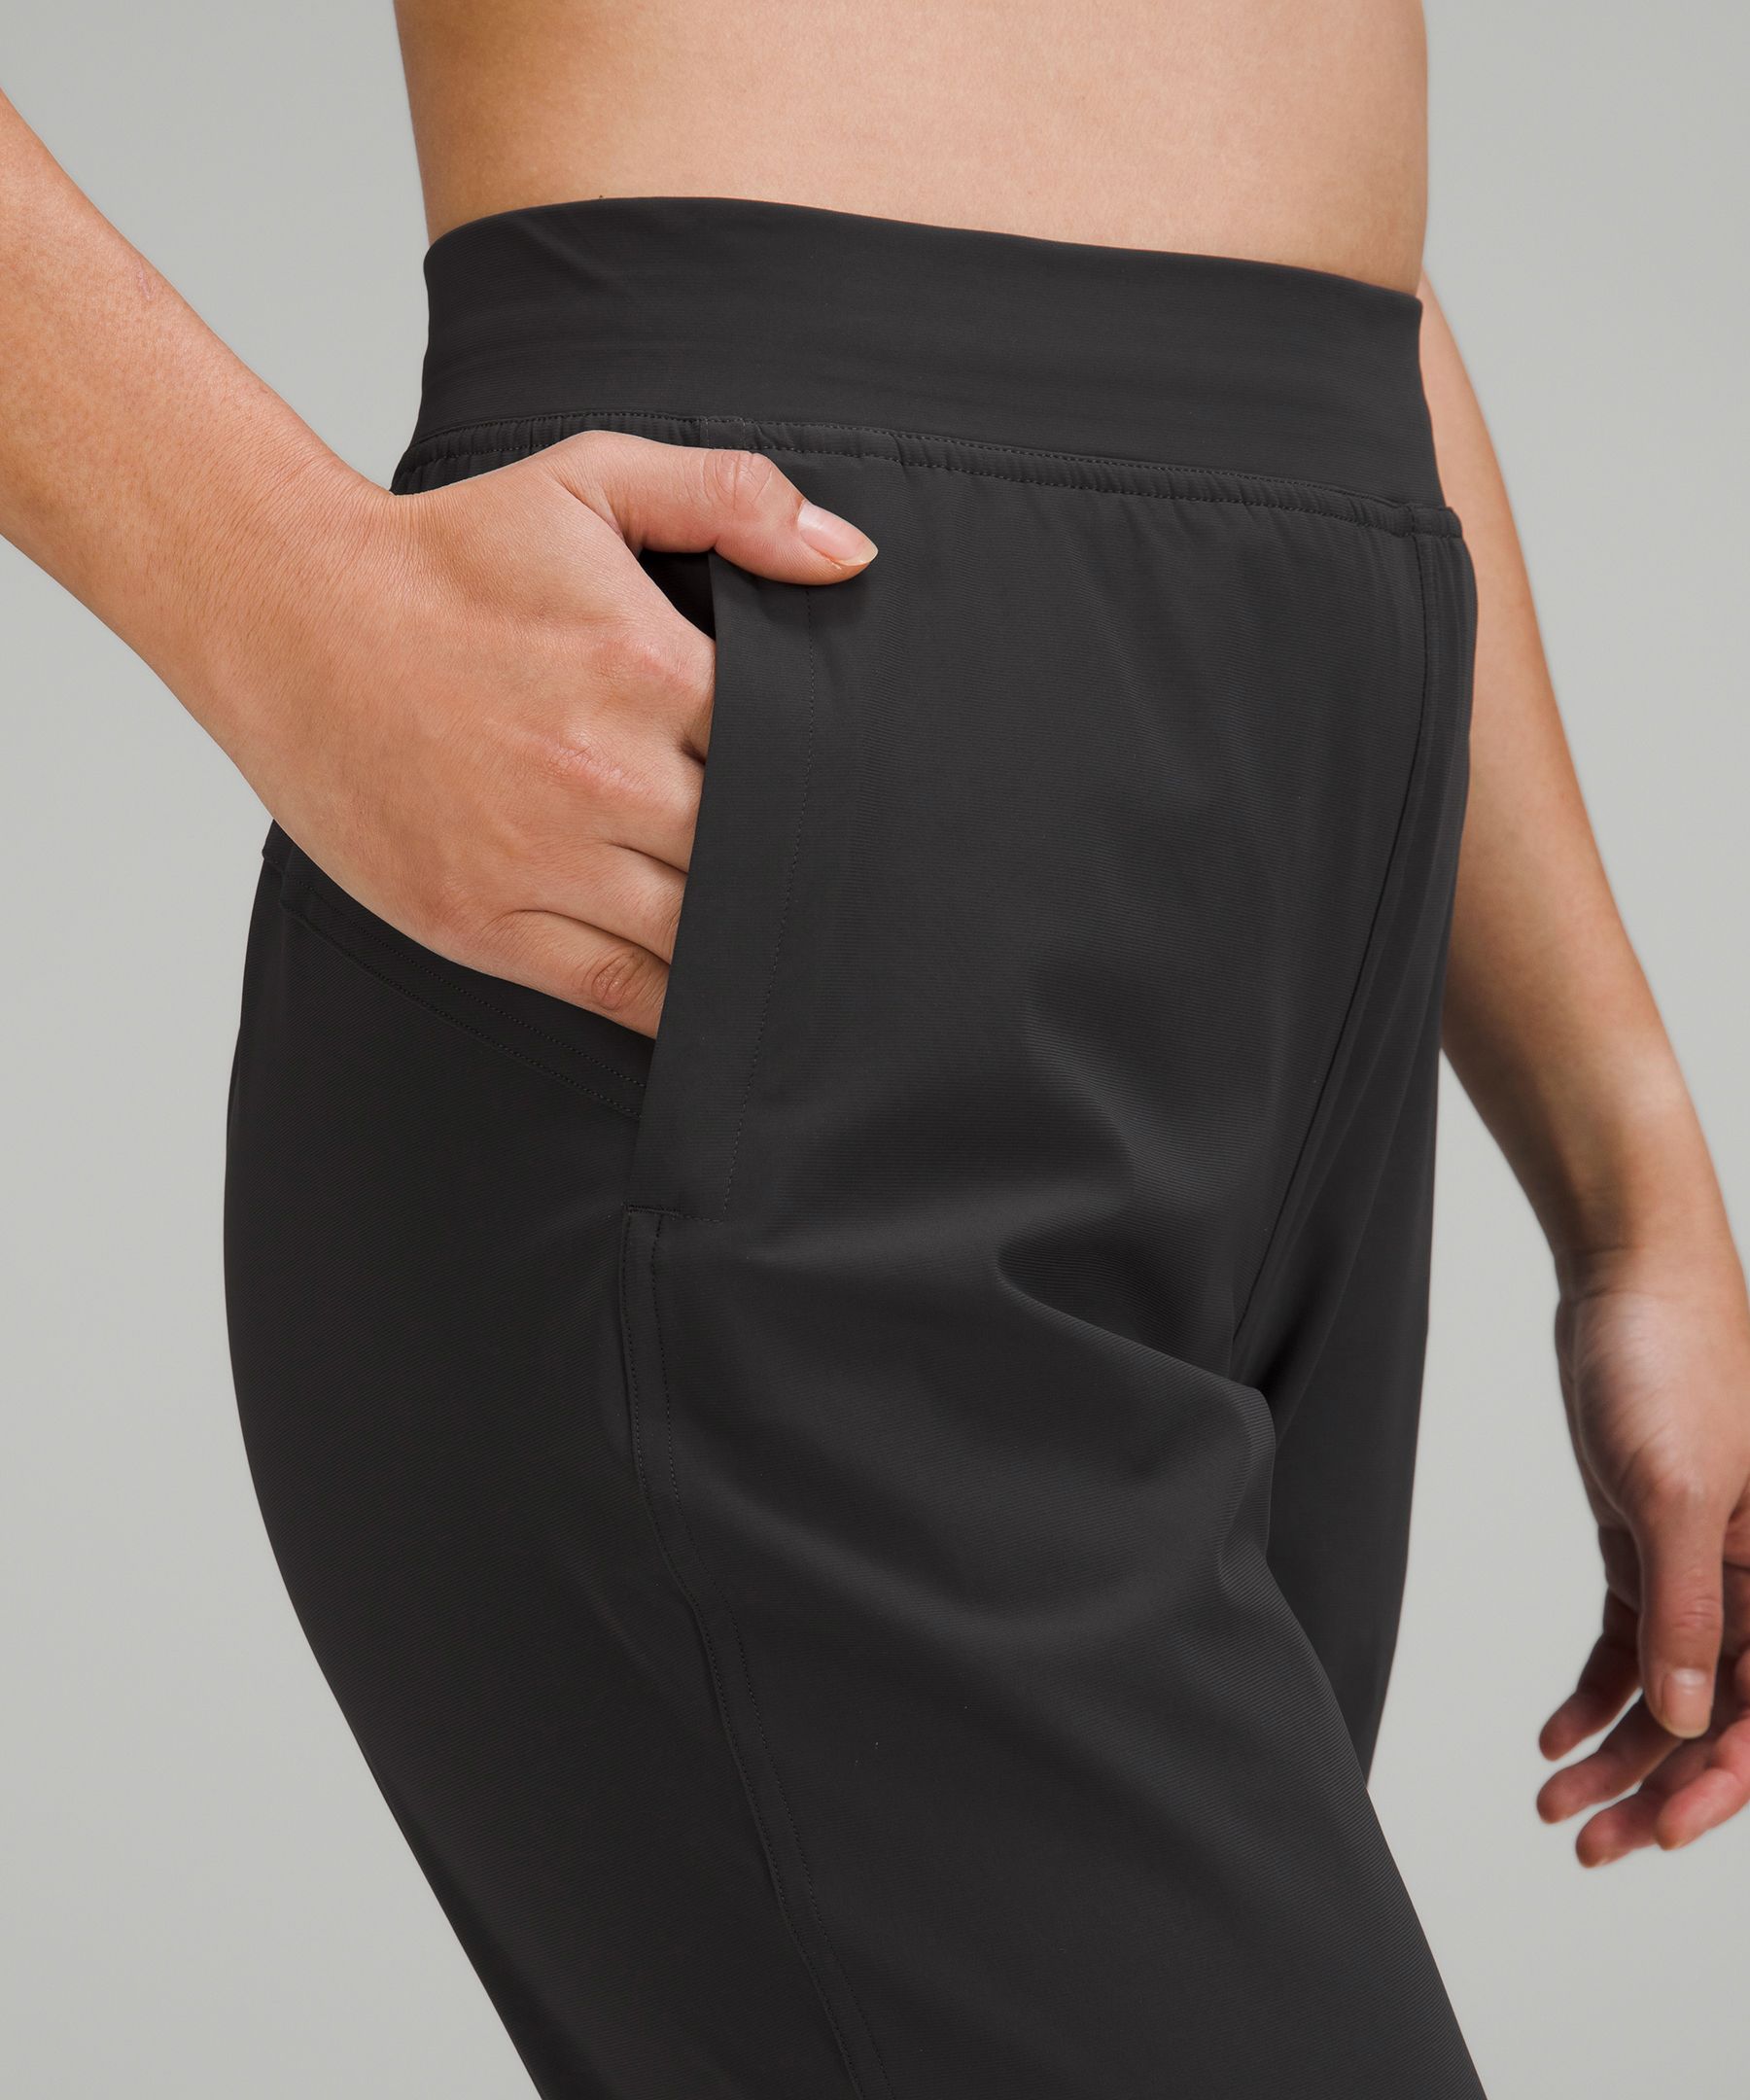 Adapted State Joggers for Shorter Ladies?? : r/lululemon